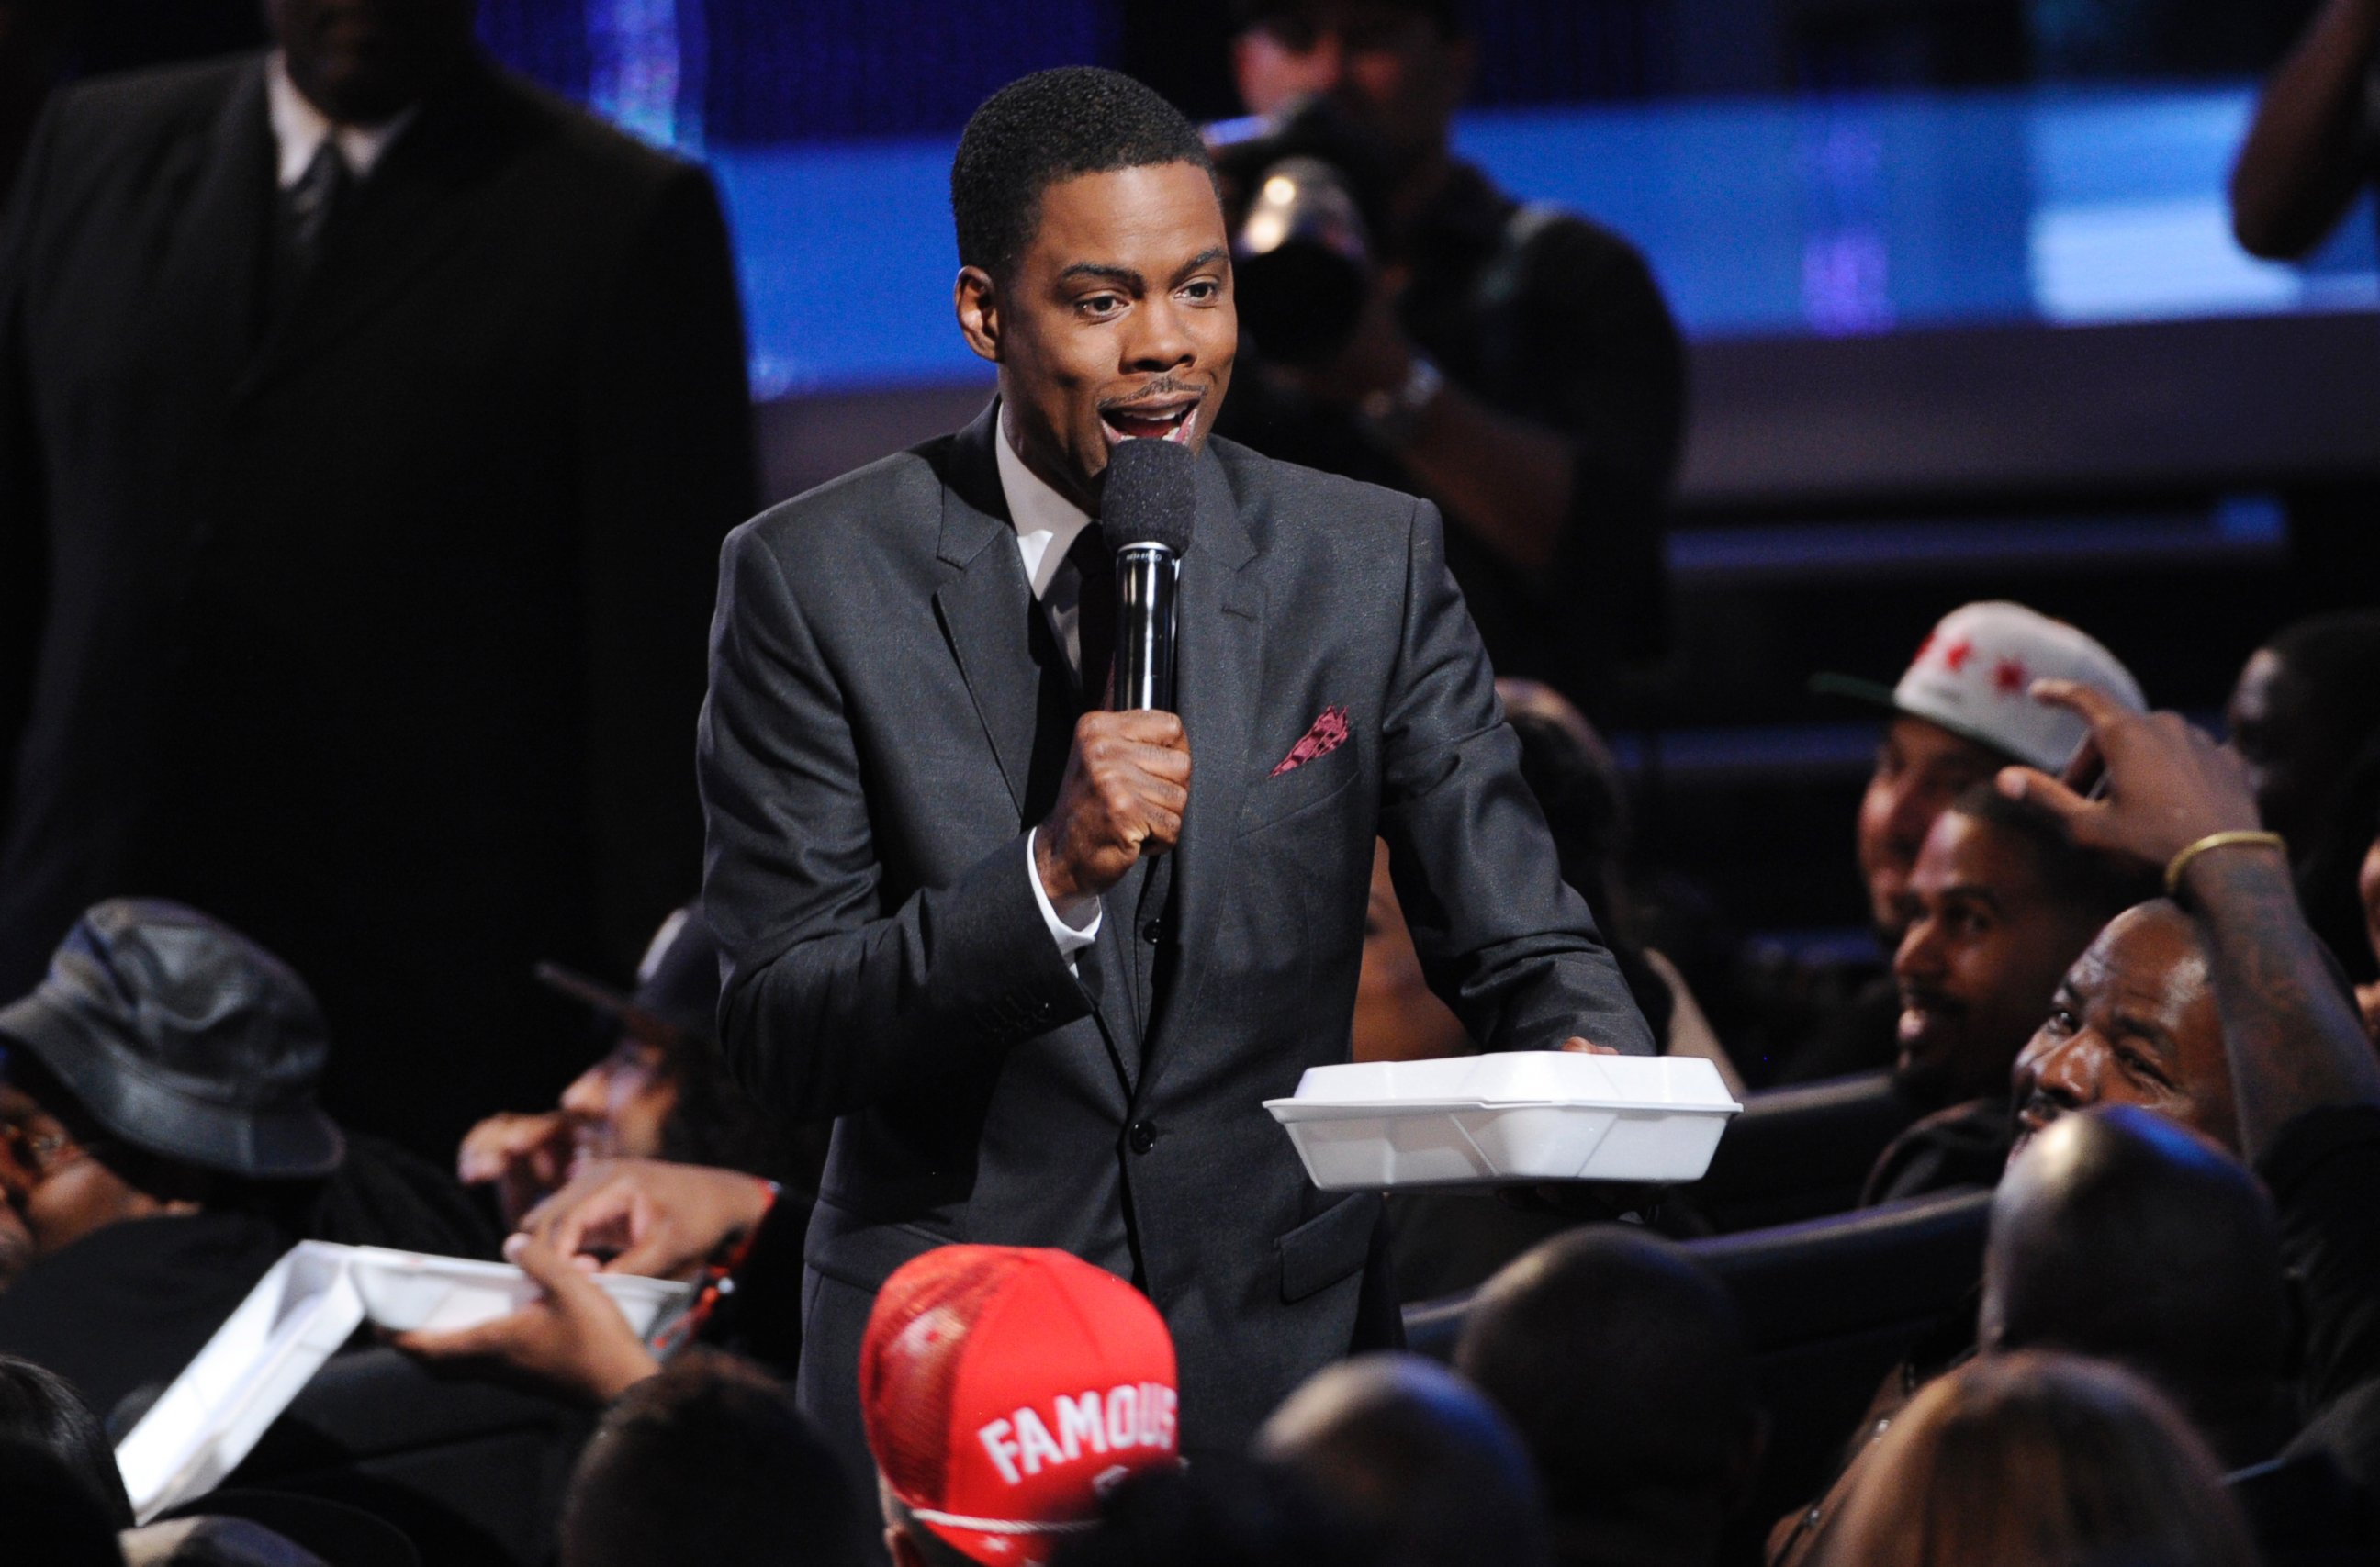 PHOTO: Host Chris Rock hands out fried chicken and waffles at the BET Awards at the Nokia Theatre, June 29, 2014, in Los Angeles.